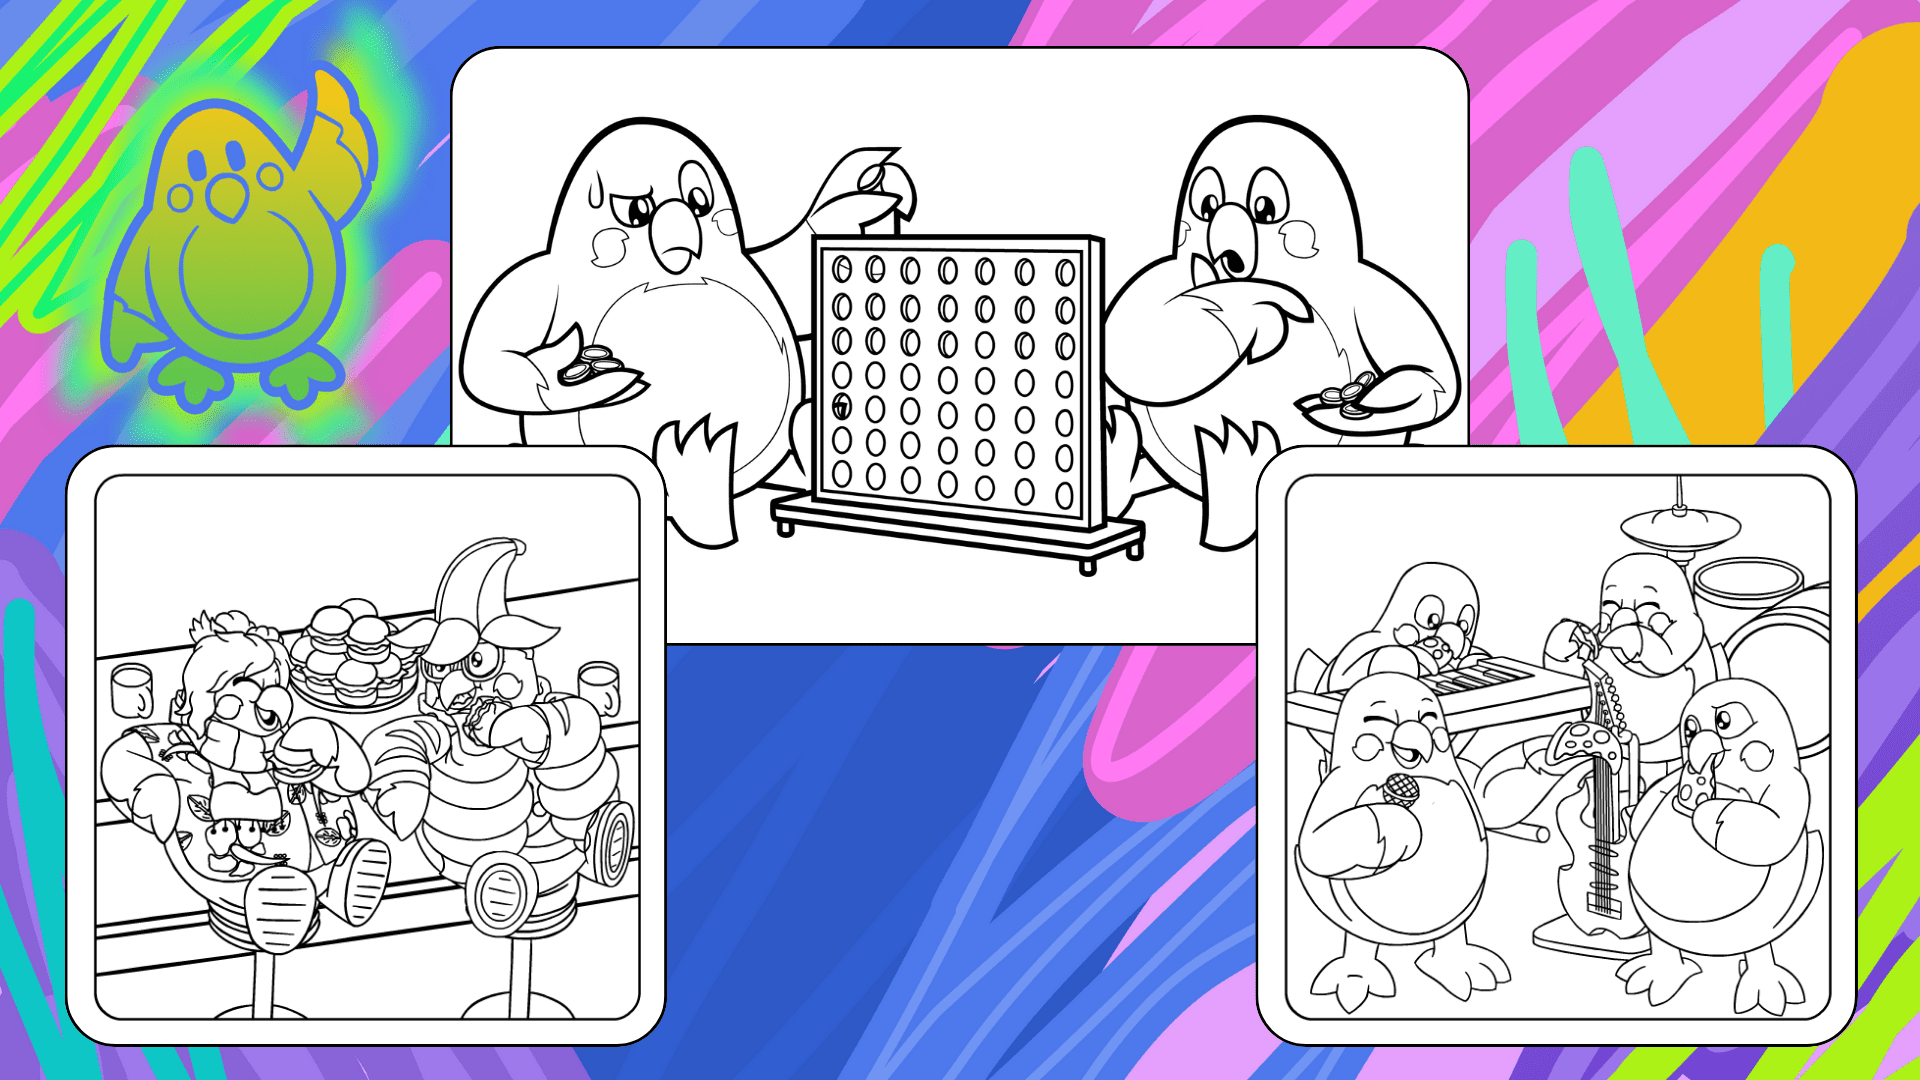 A layout of three cool coloring pages for older kids. The background shows 1990s retro neon colored squiggly lines in green, blue, yellow, pink, and purple.